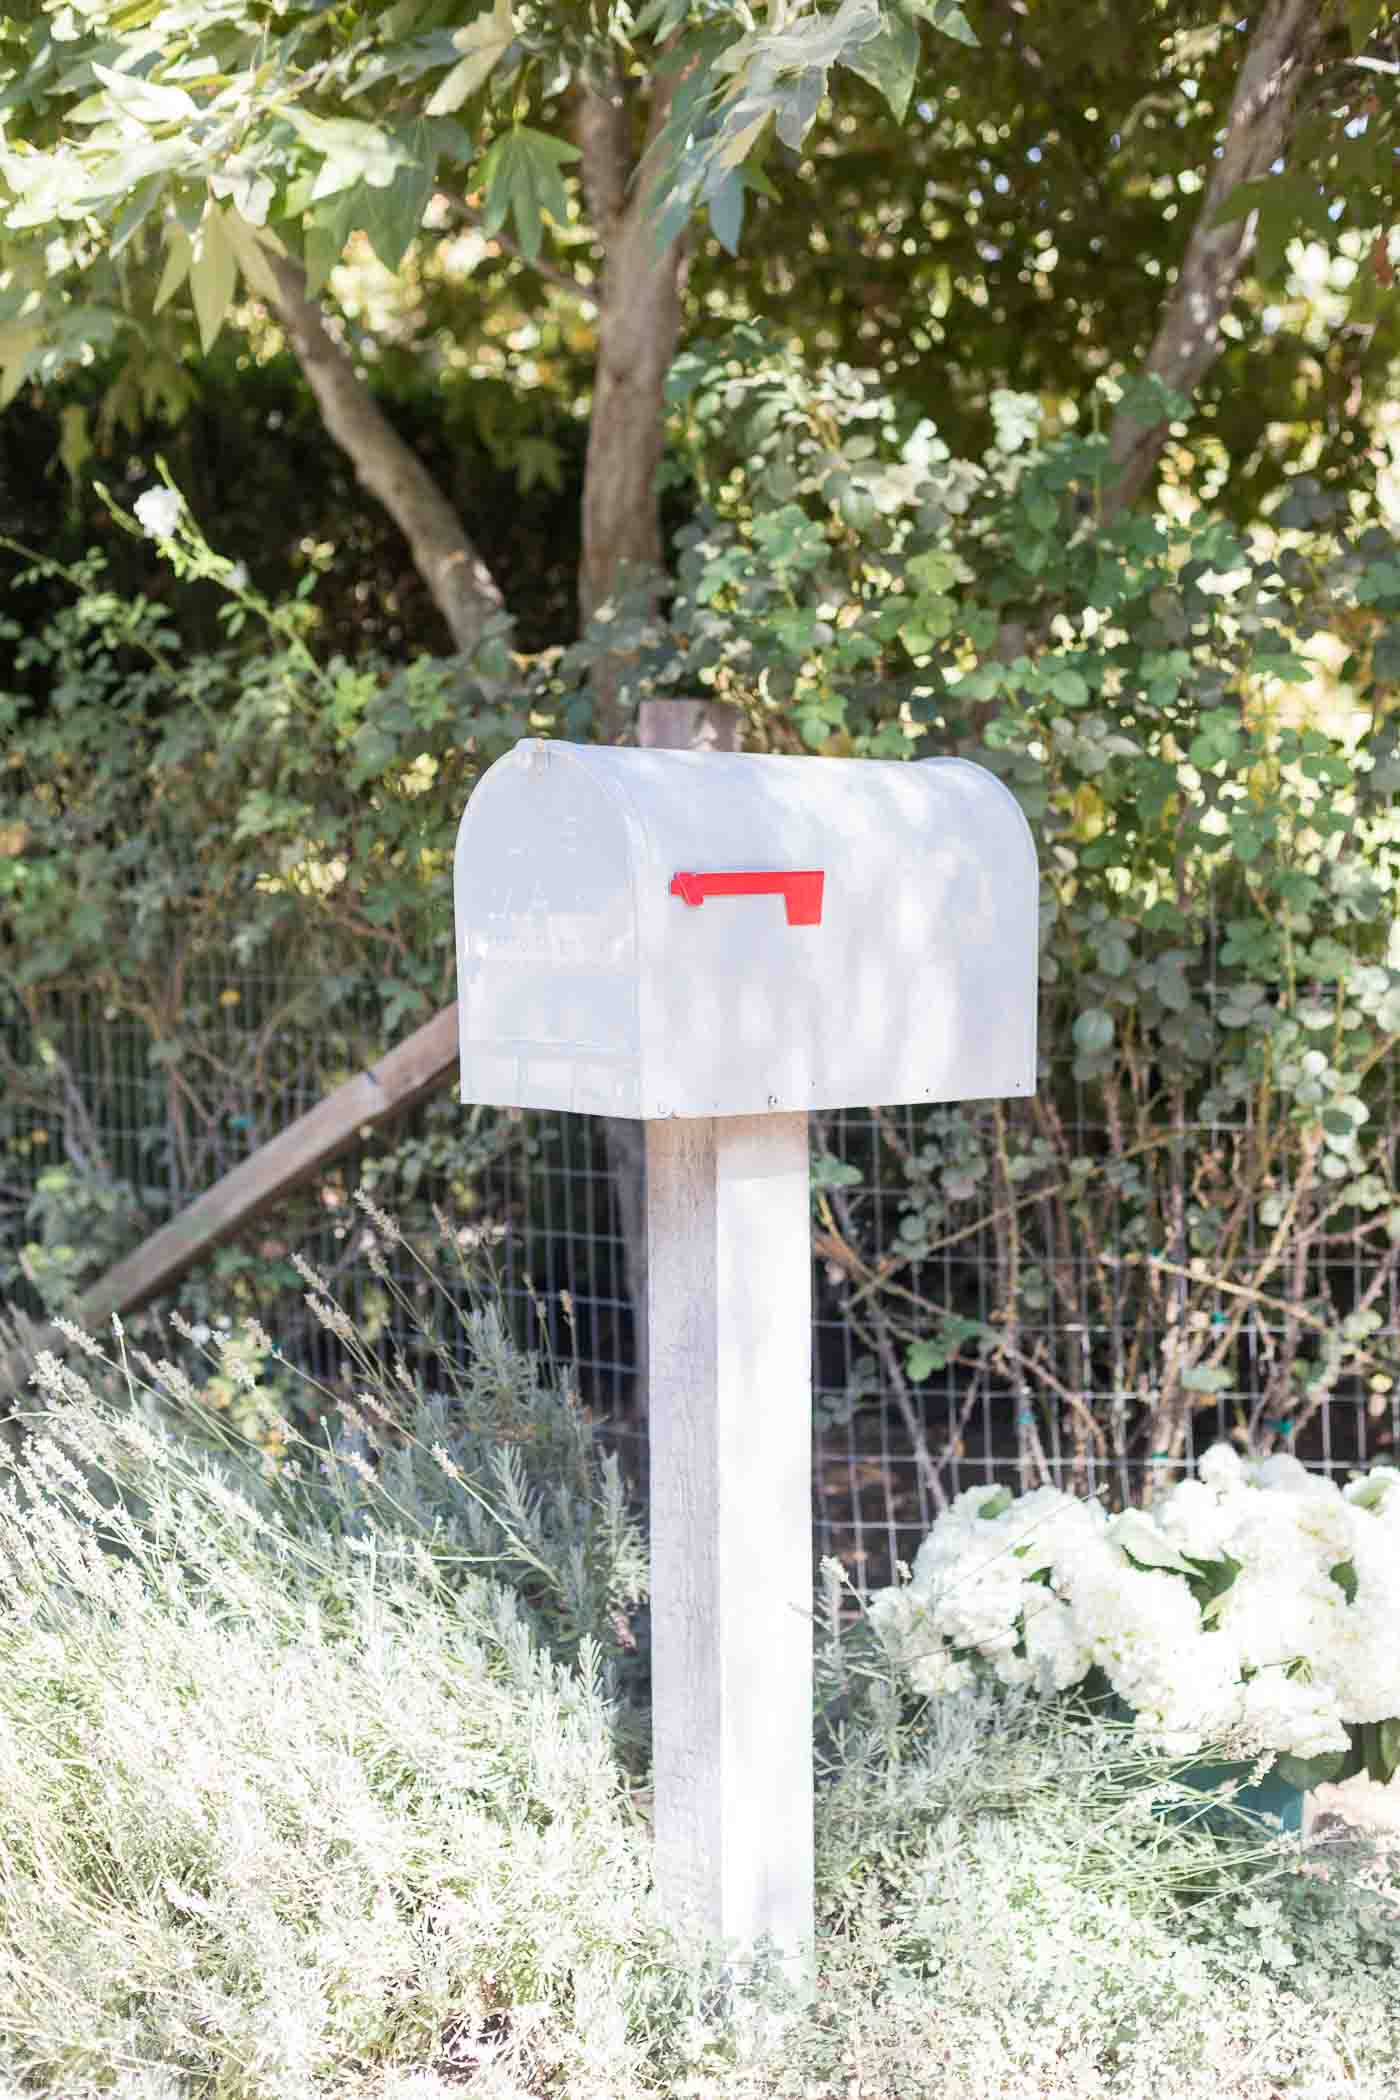 A white mailbox on a wooden stand, greenery in the background